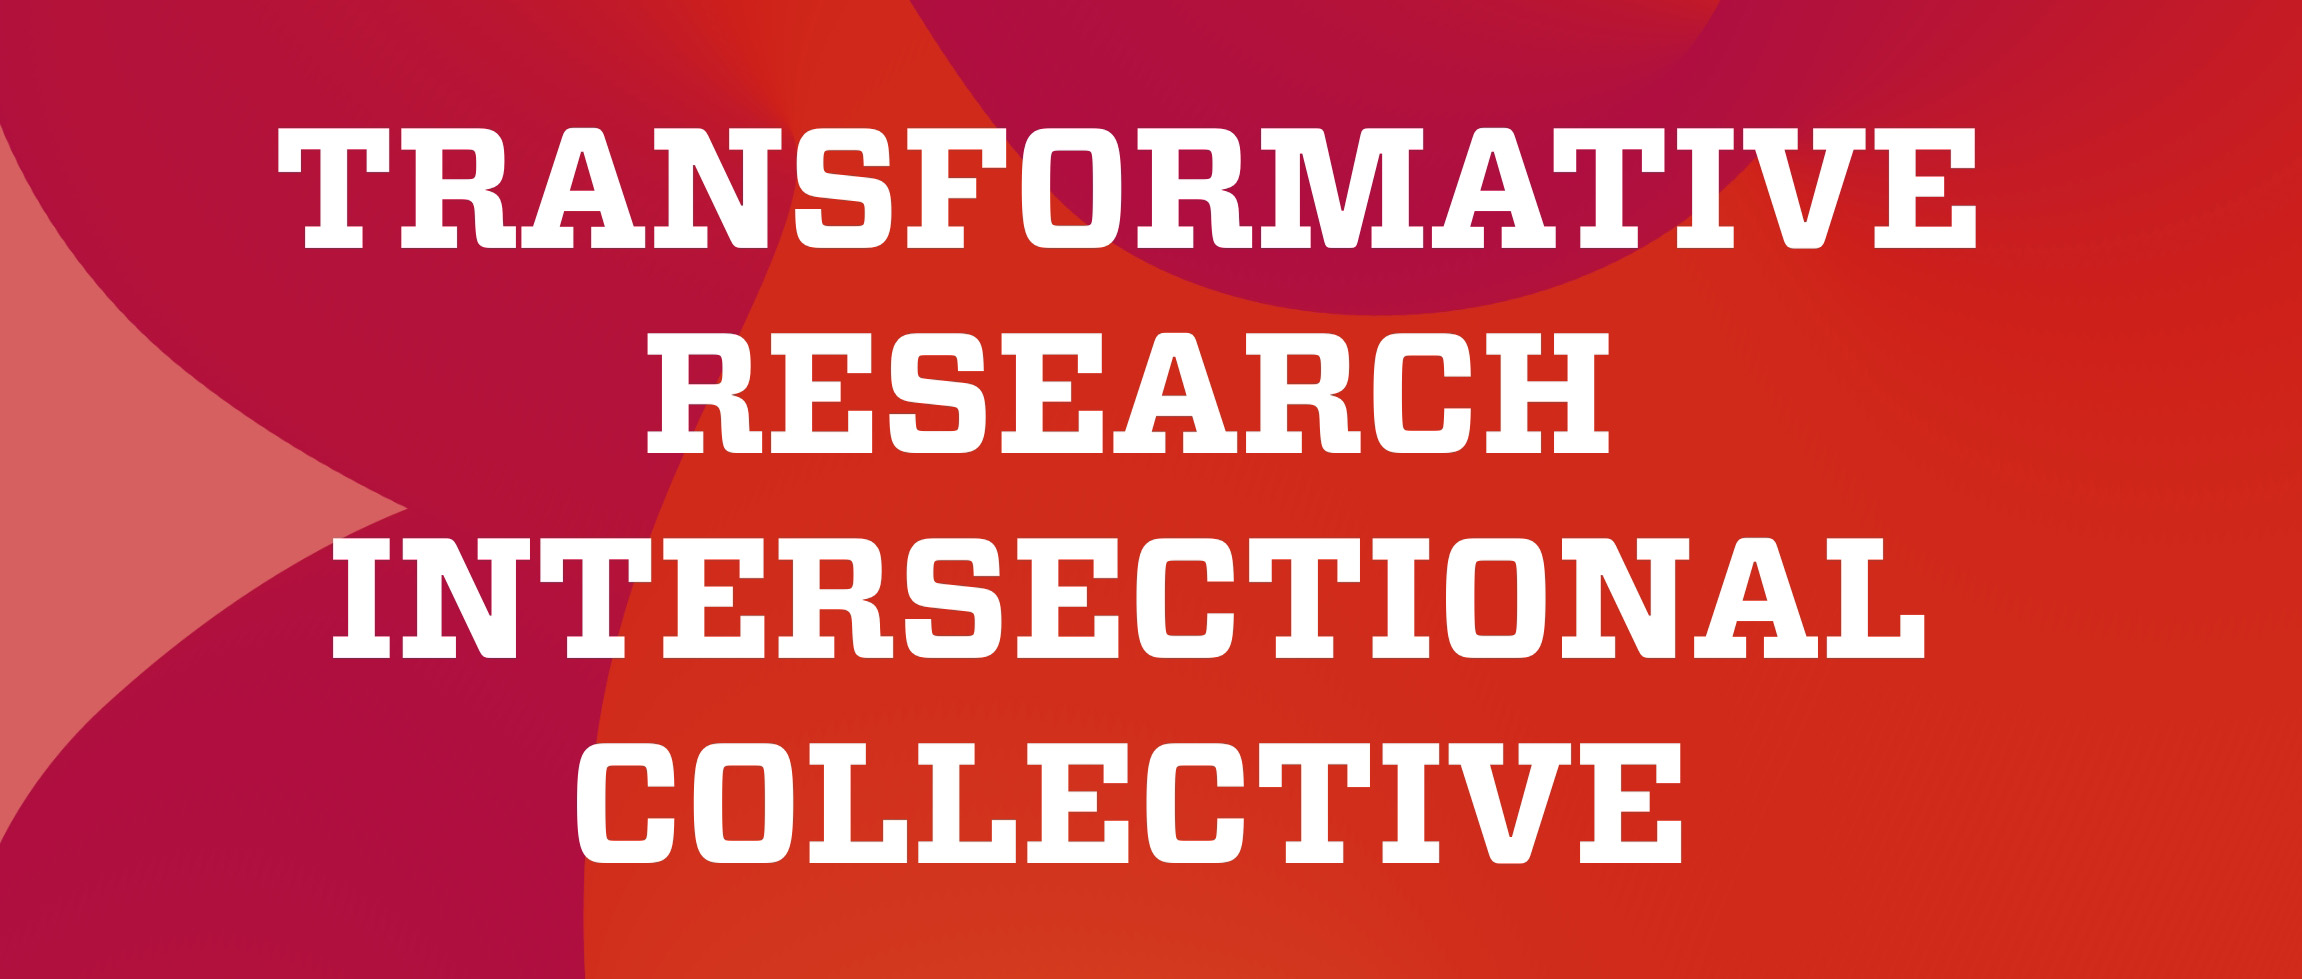 Transformative Research Intersectional Collective